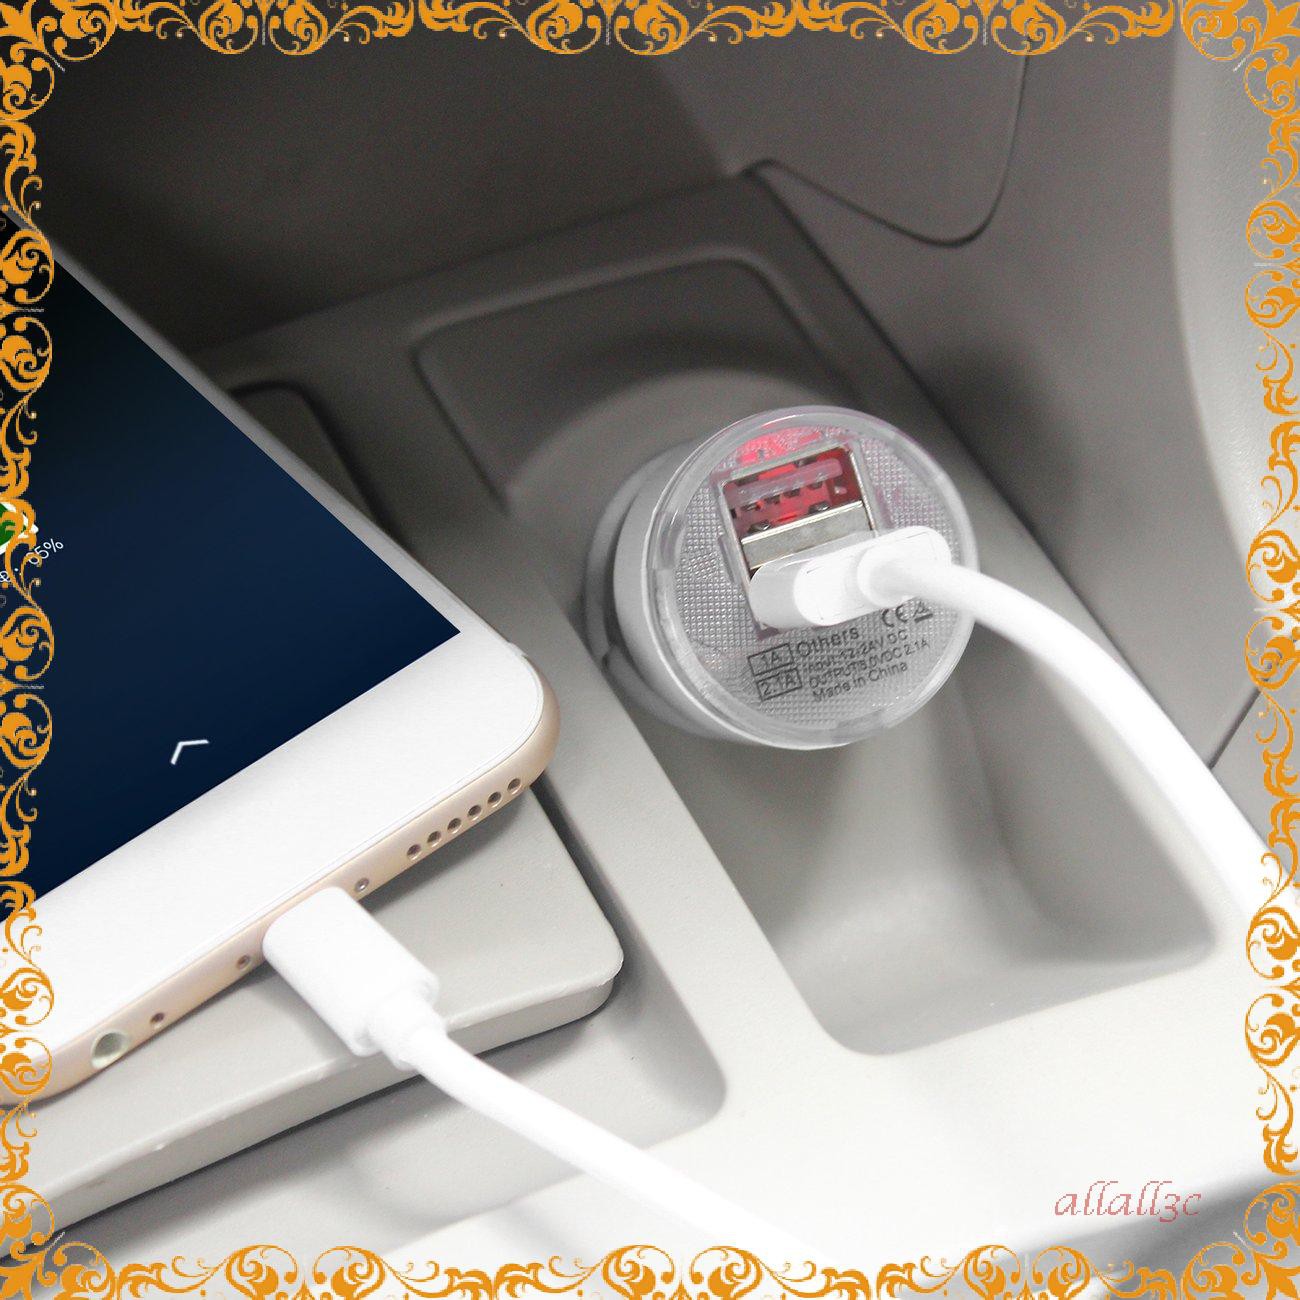 Dual 2 Port USB Car Power Charger Adapter for iPad2 3 For iPhone4 4S For iPod MP3[╭(′▽`)╭(′▽`)╯]